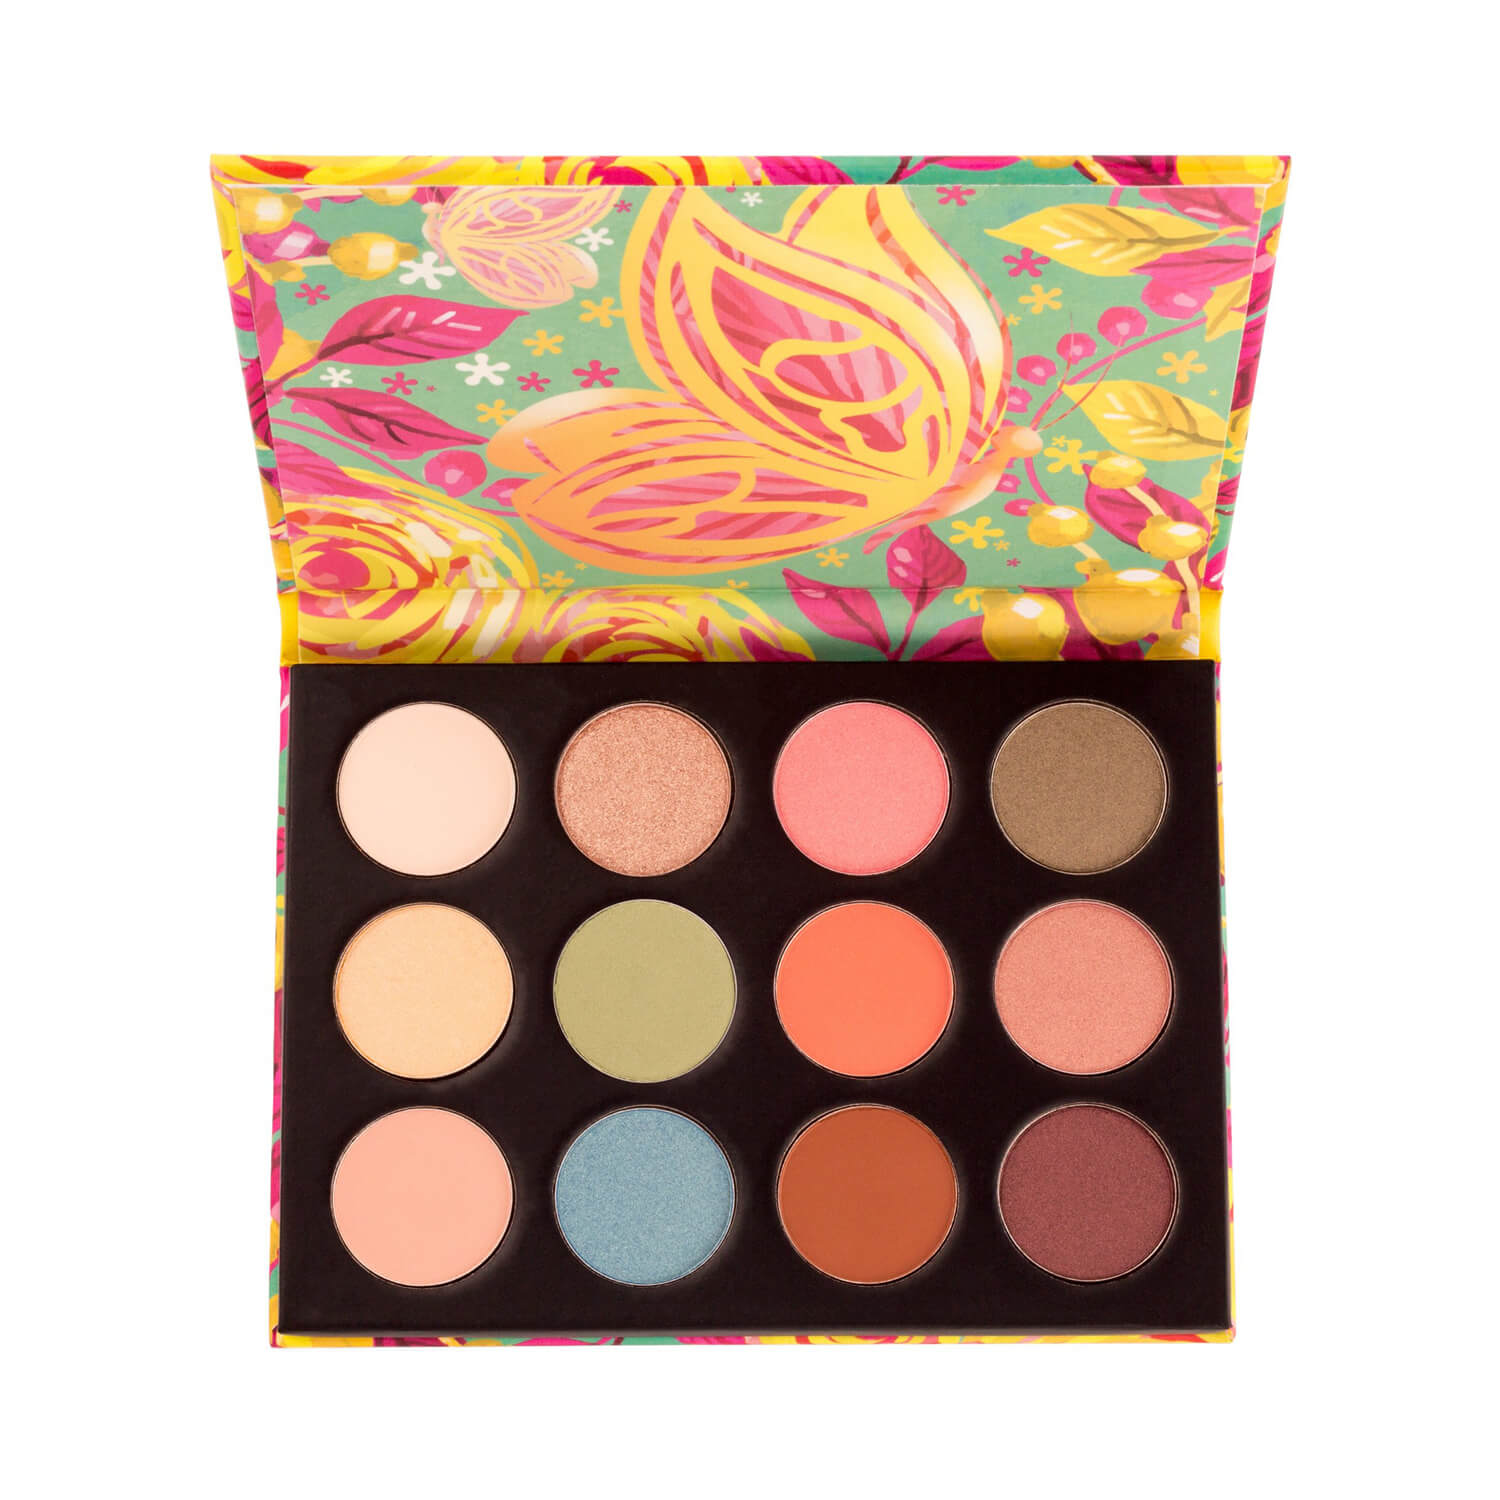 Coastal Scents Painted Lady Eyeshadow Palette